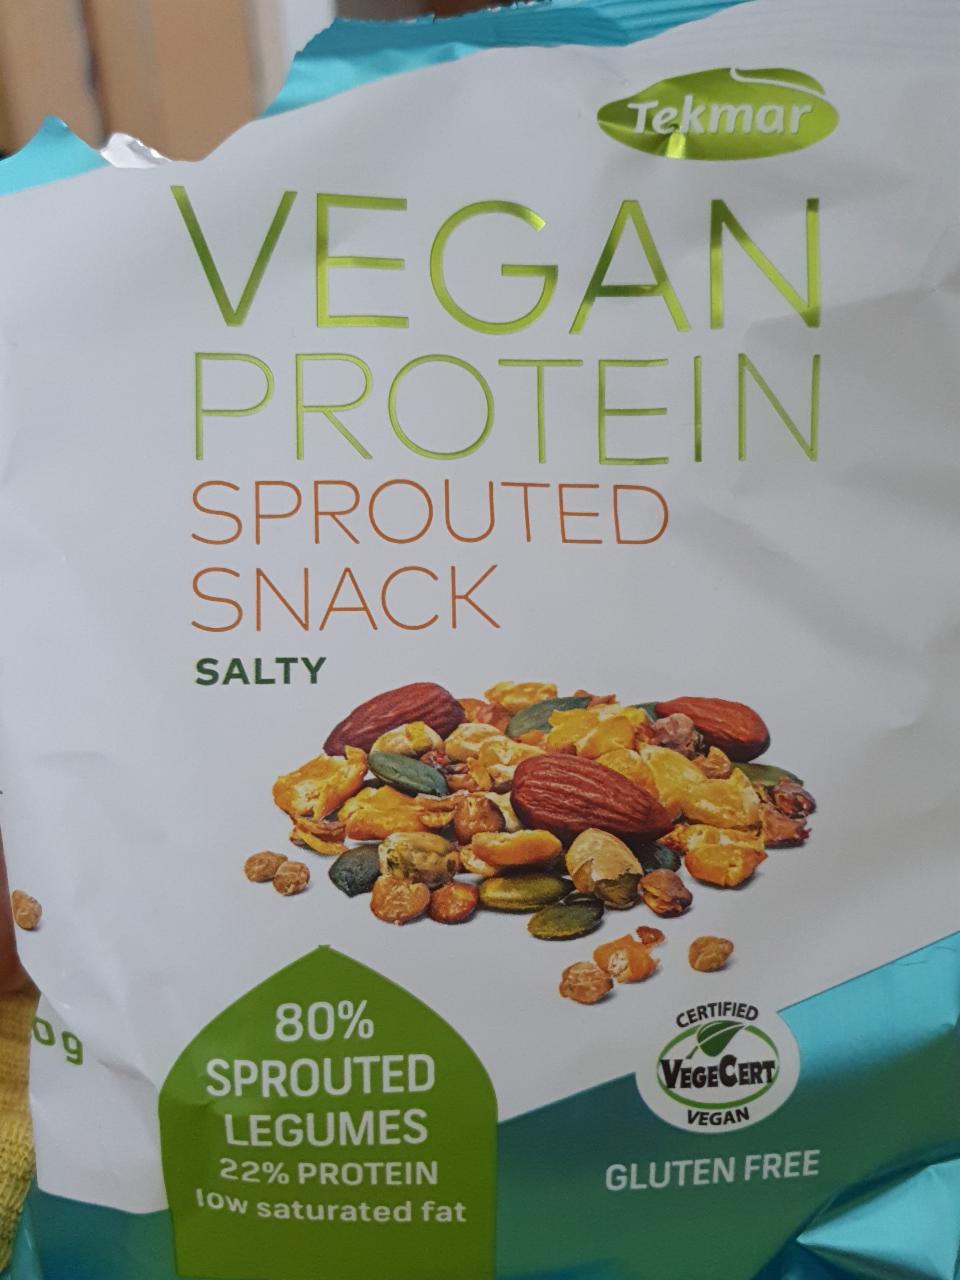 Fotografie - Vegan Protein Sprouted Snack salty